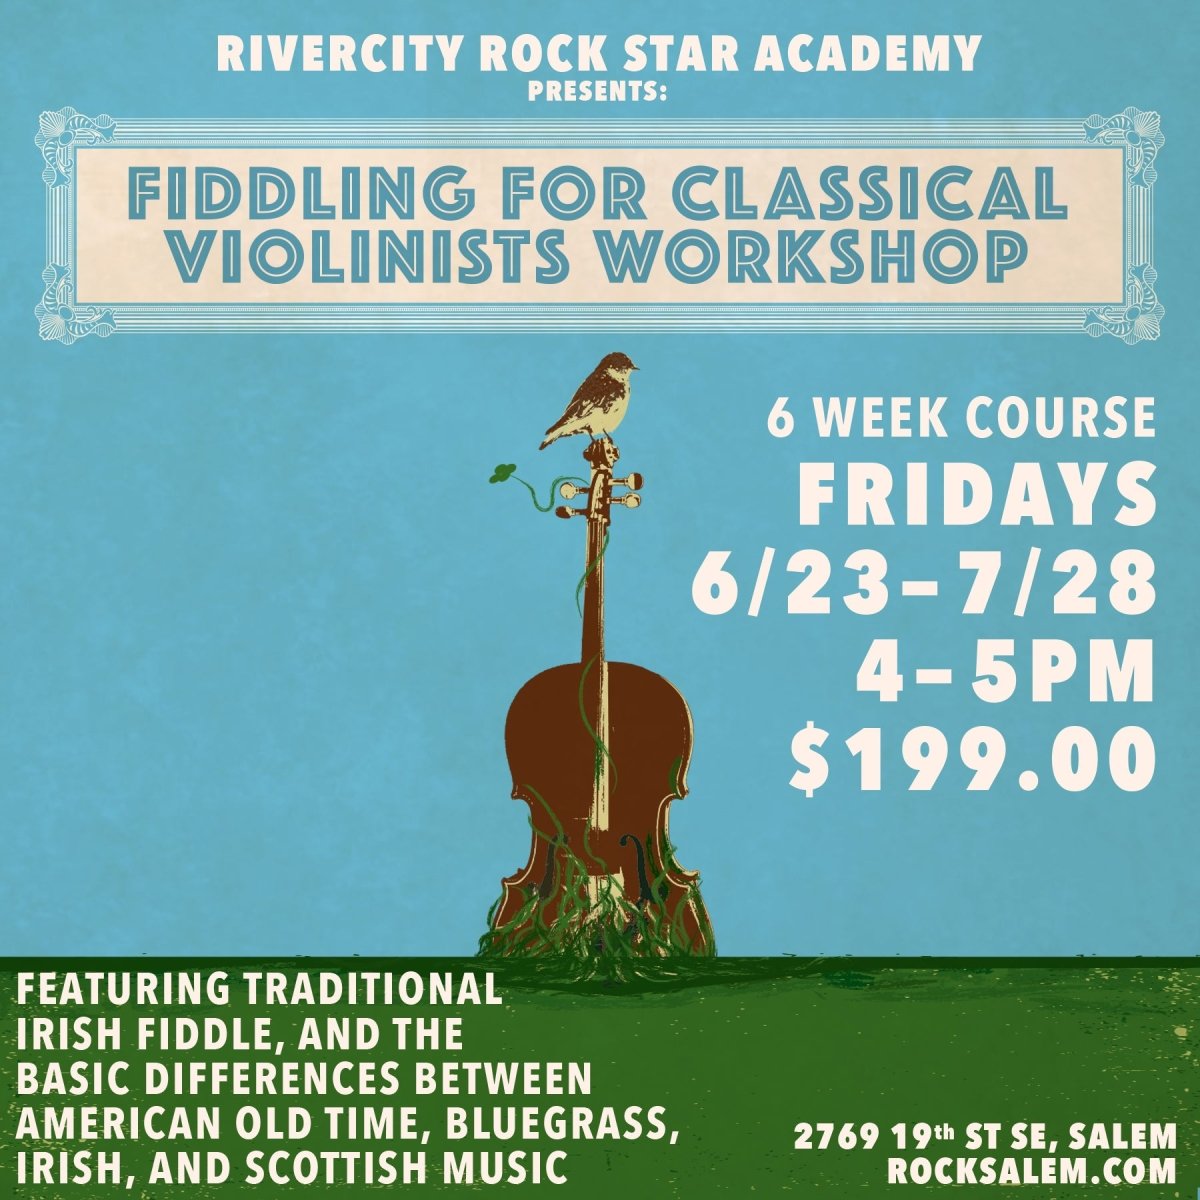 Fiddling for Classical Violinists - RiverCity Rock Star Academy Music Store